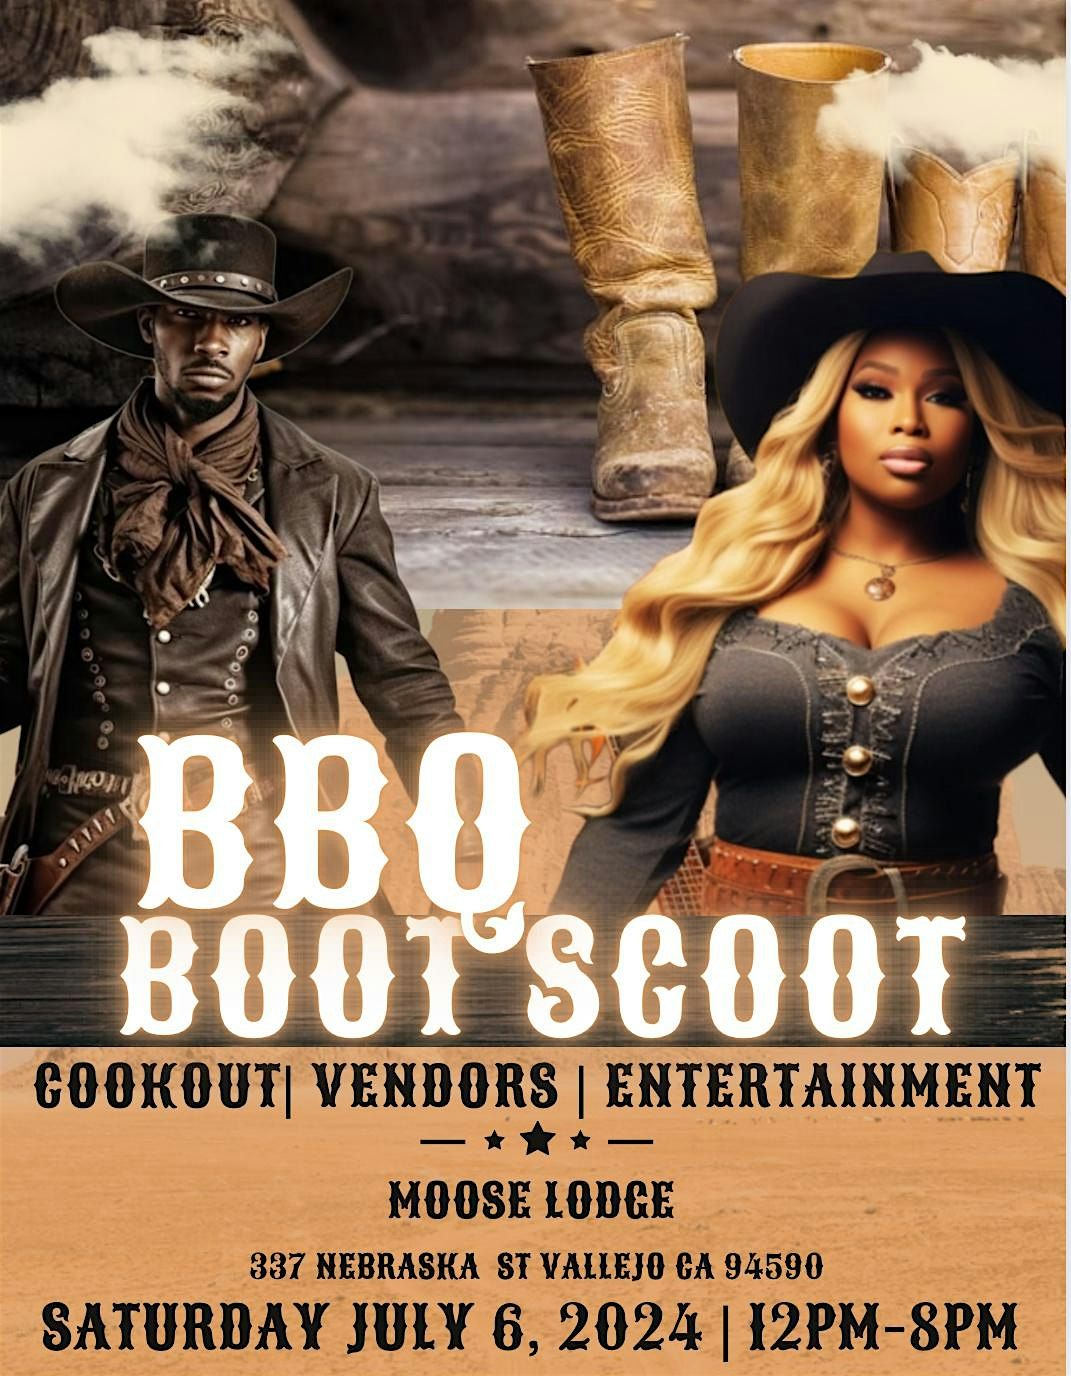 BBQ Boot Scoot